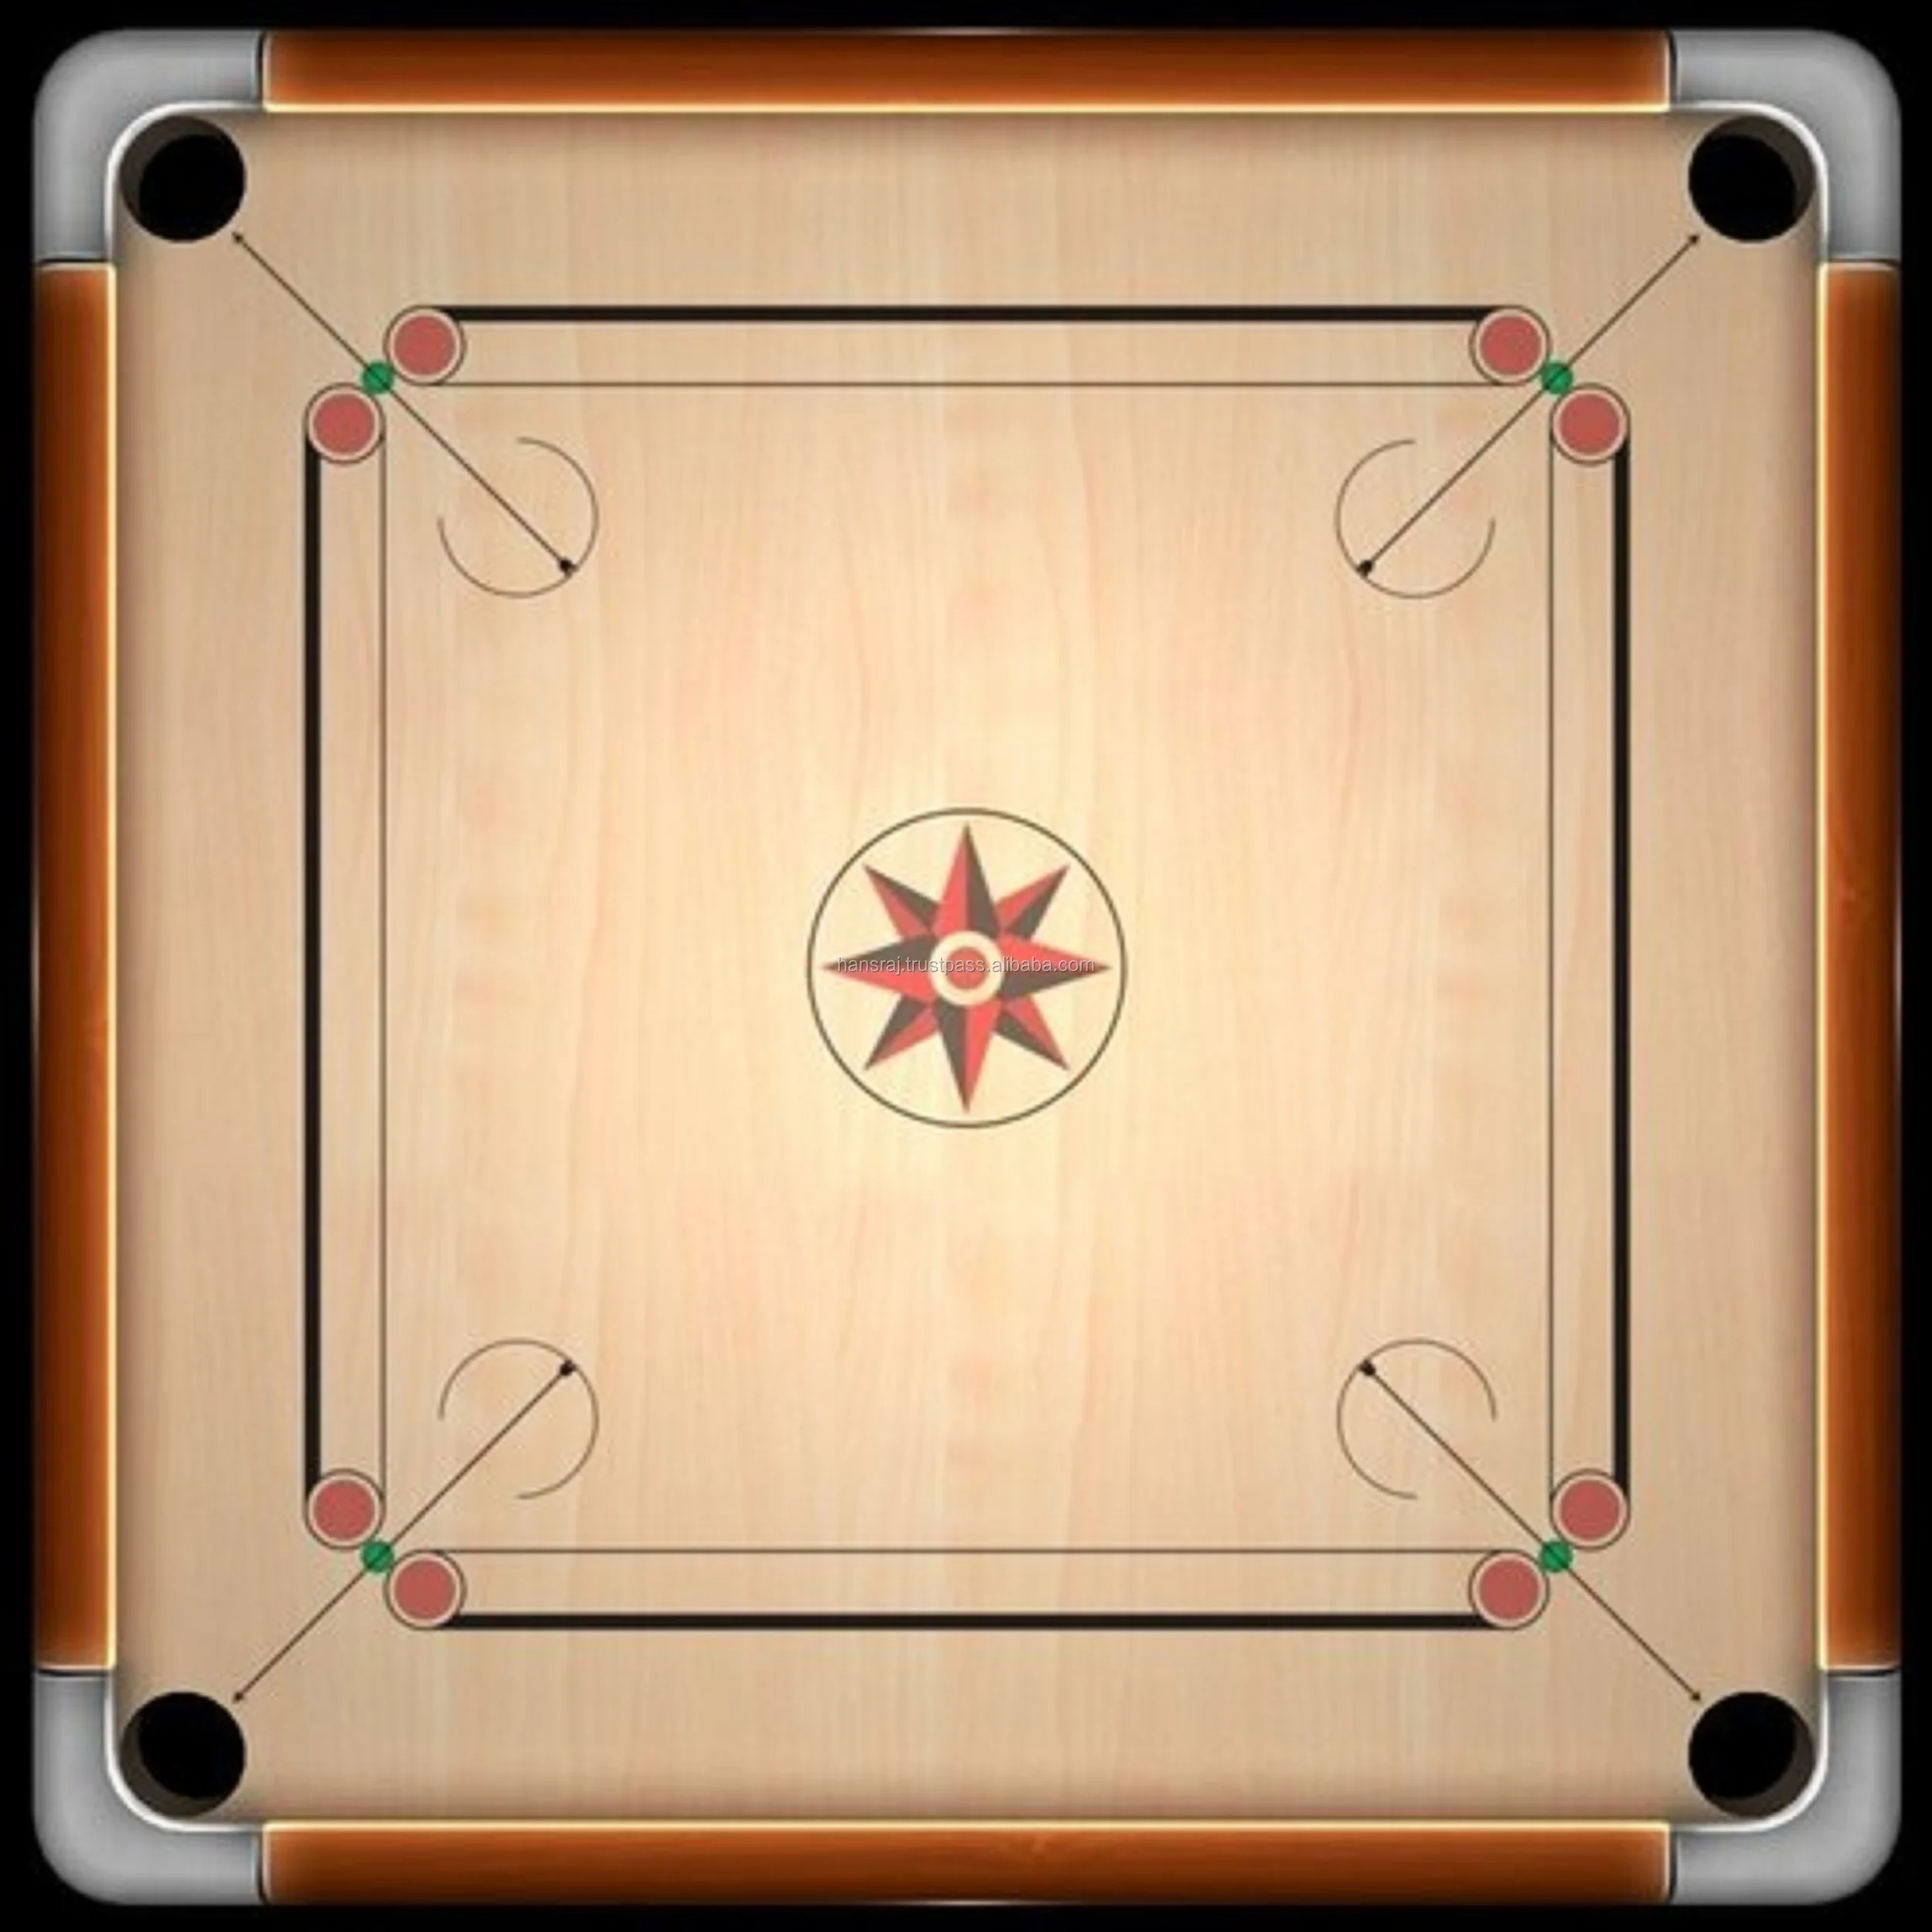 Buy PRINT BHARAT PRINT BHARAT Pocket Carrom Board with Wooden Coins Striker  and Carrom Powder,Wooden Round Online at Low Prices in India - Amazon.in